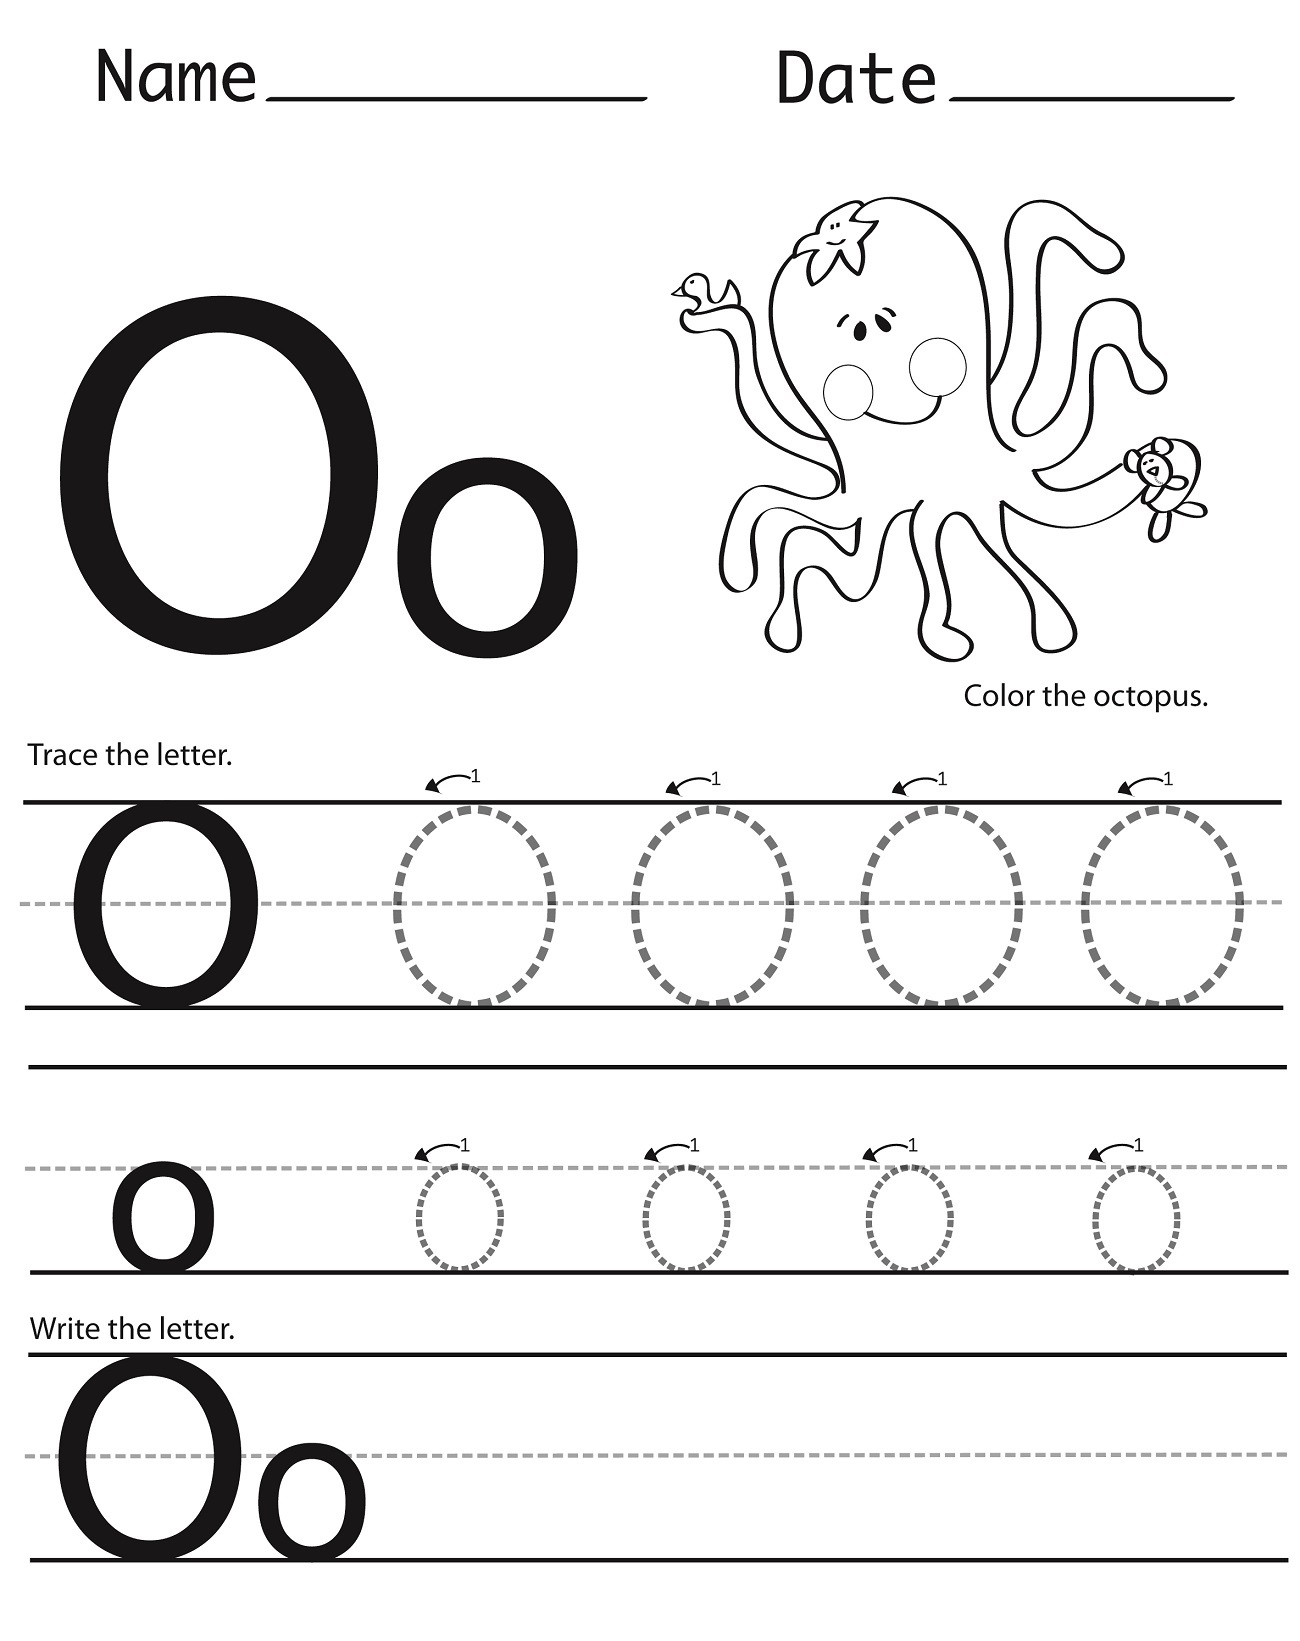 tracing letter o worksheets fun